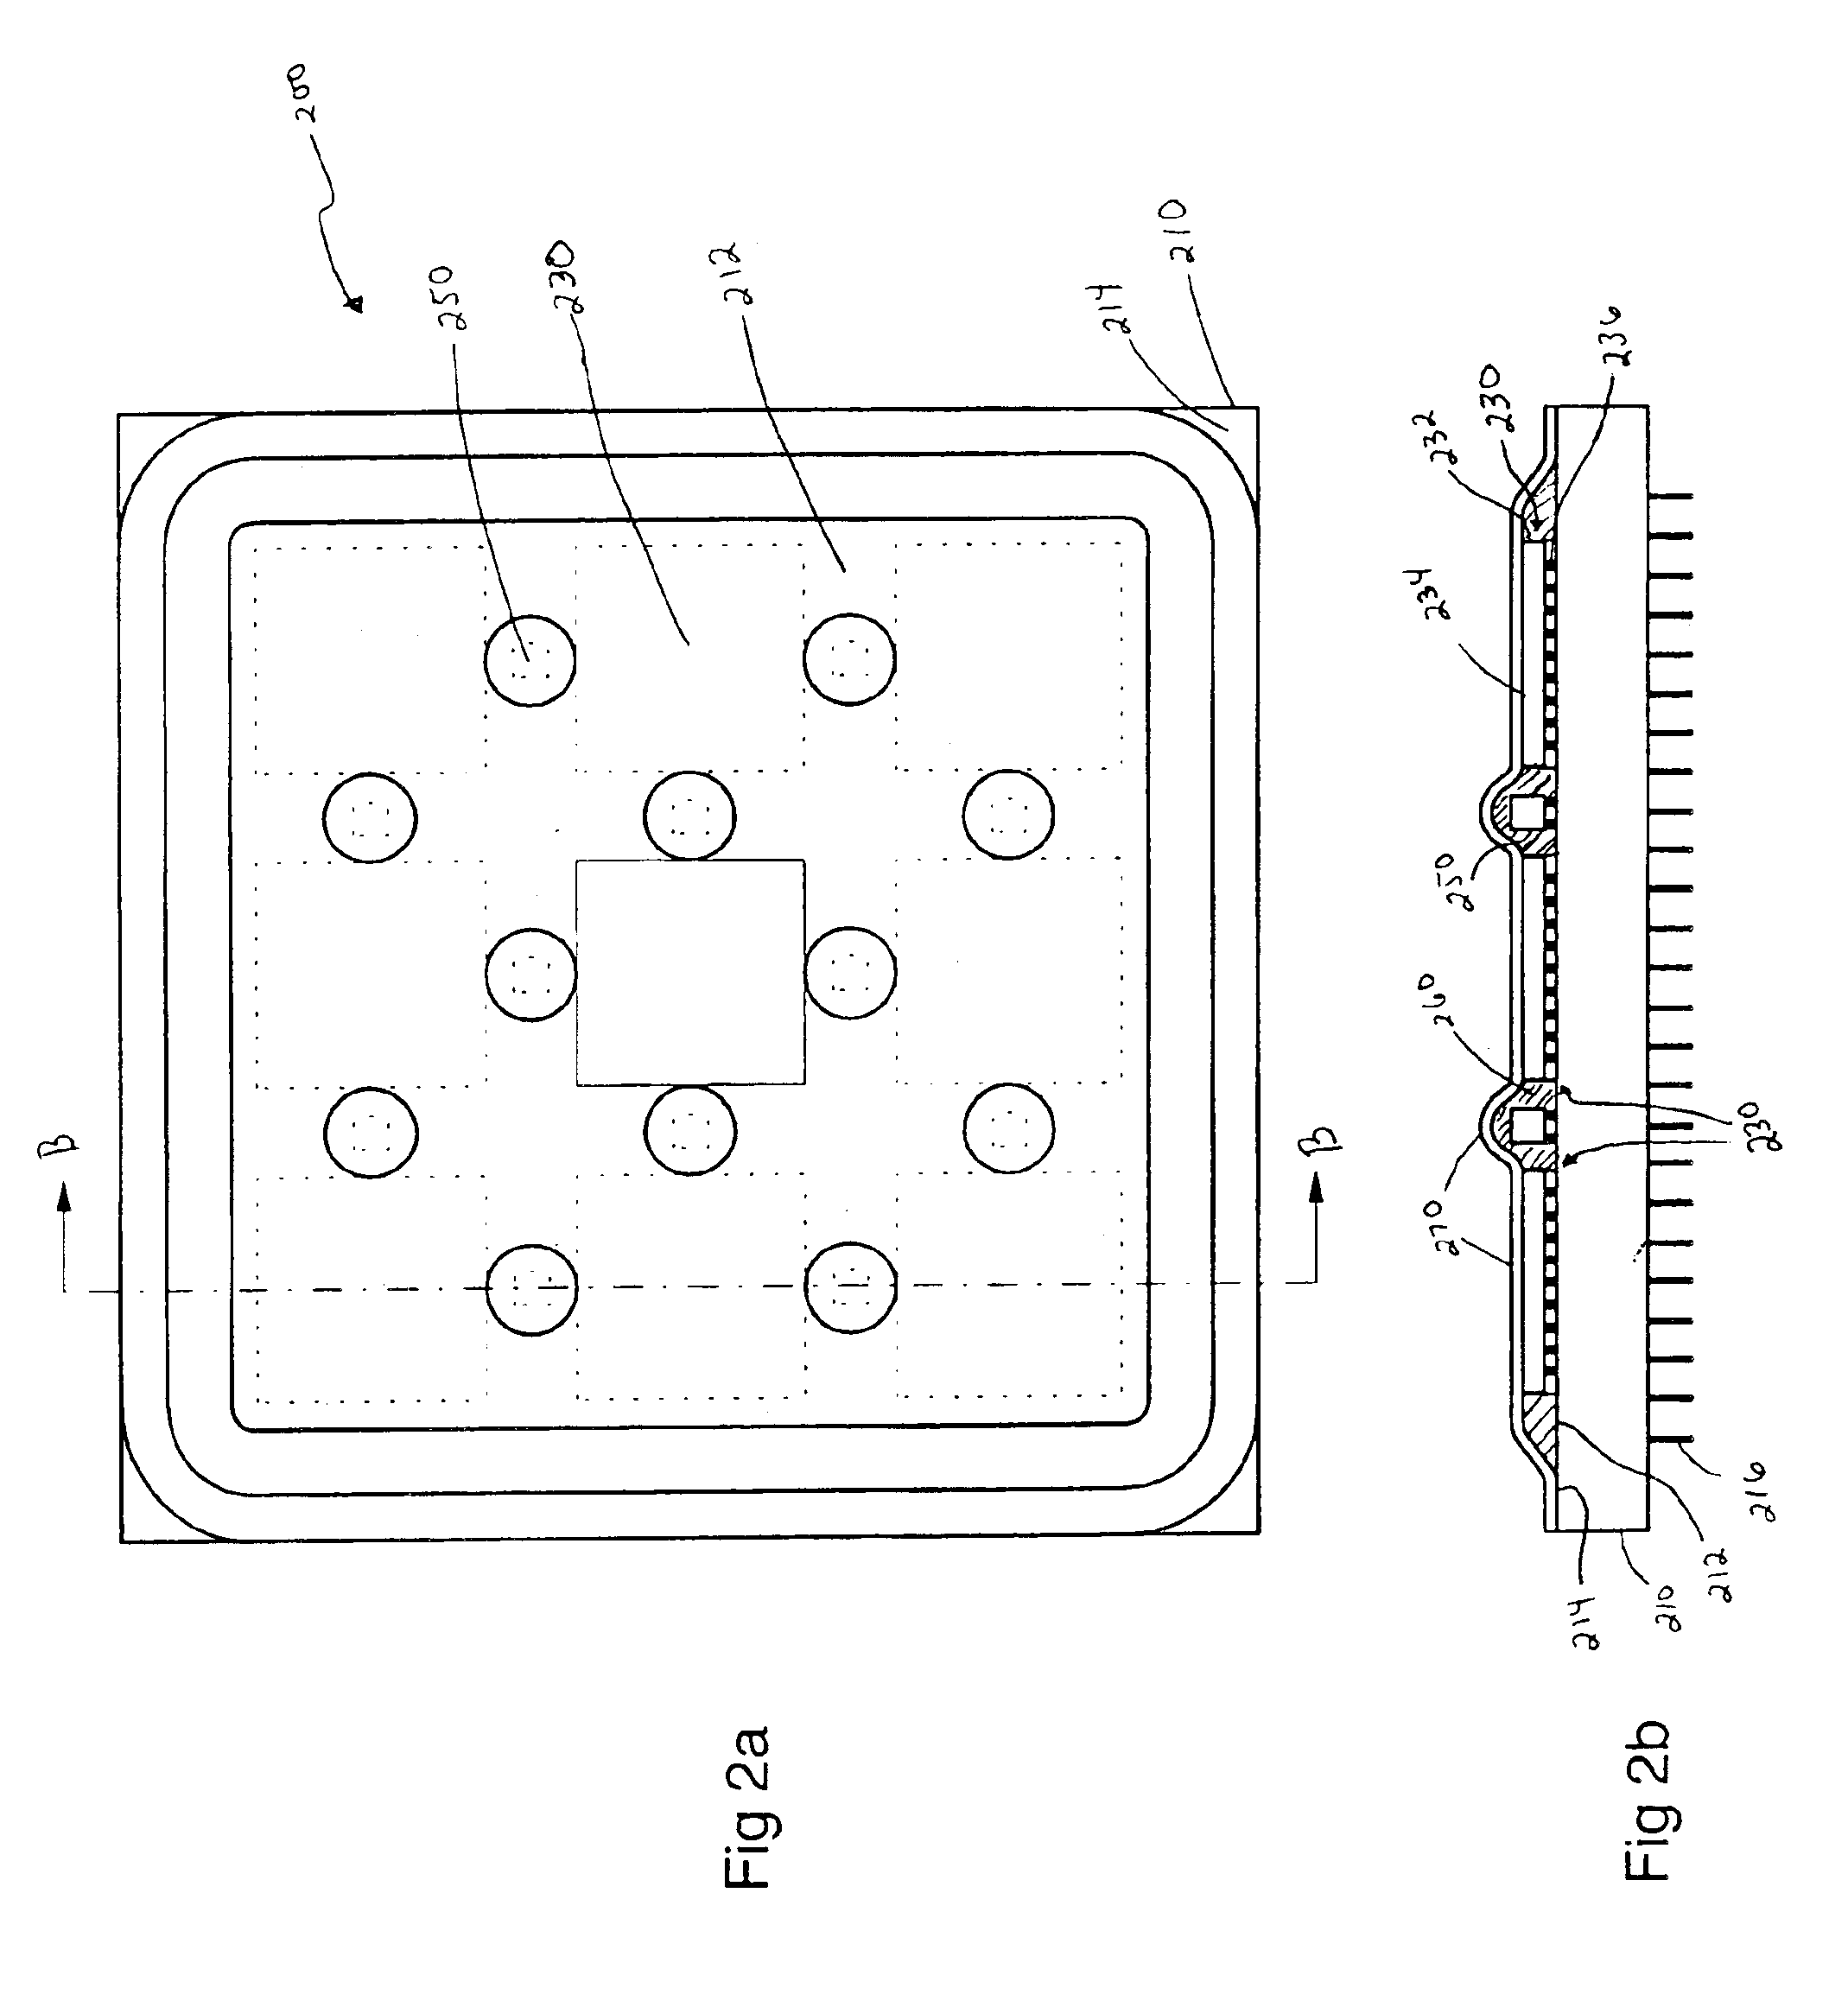 Electronic device substrate assembly with multilayer impermeable barrier and method of making